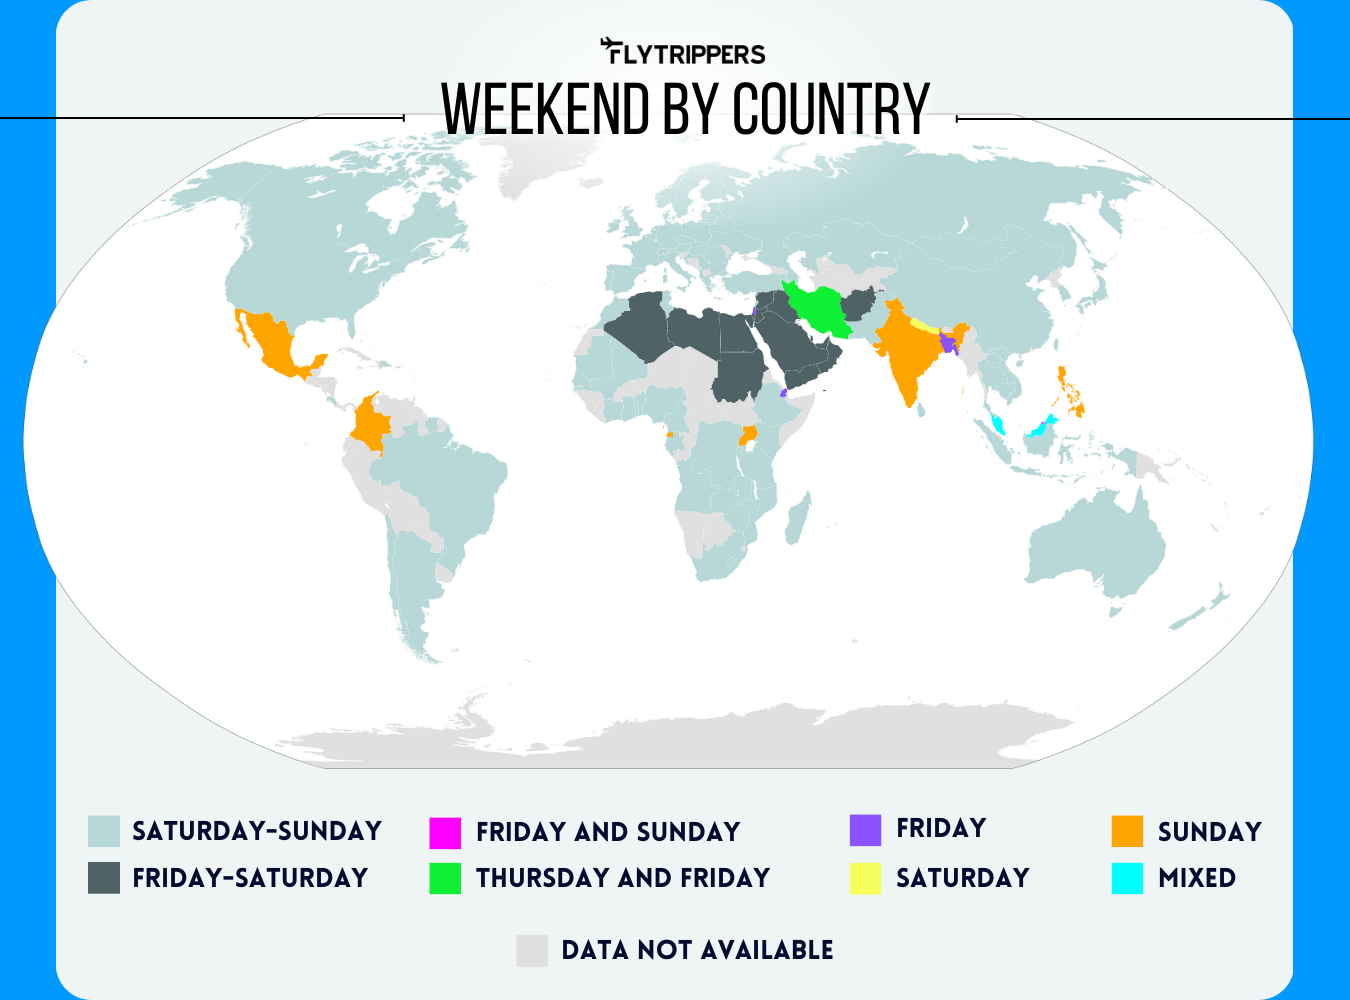 Map of weekend dates of each country - Flytrippers